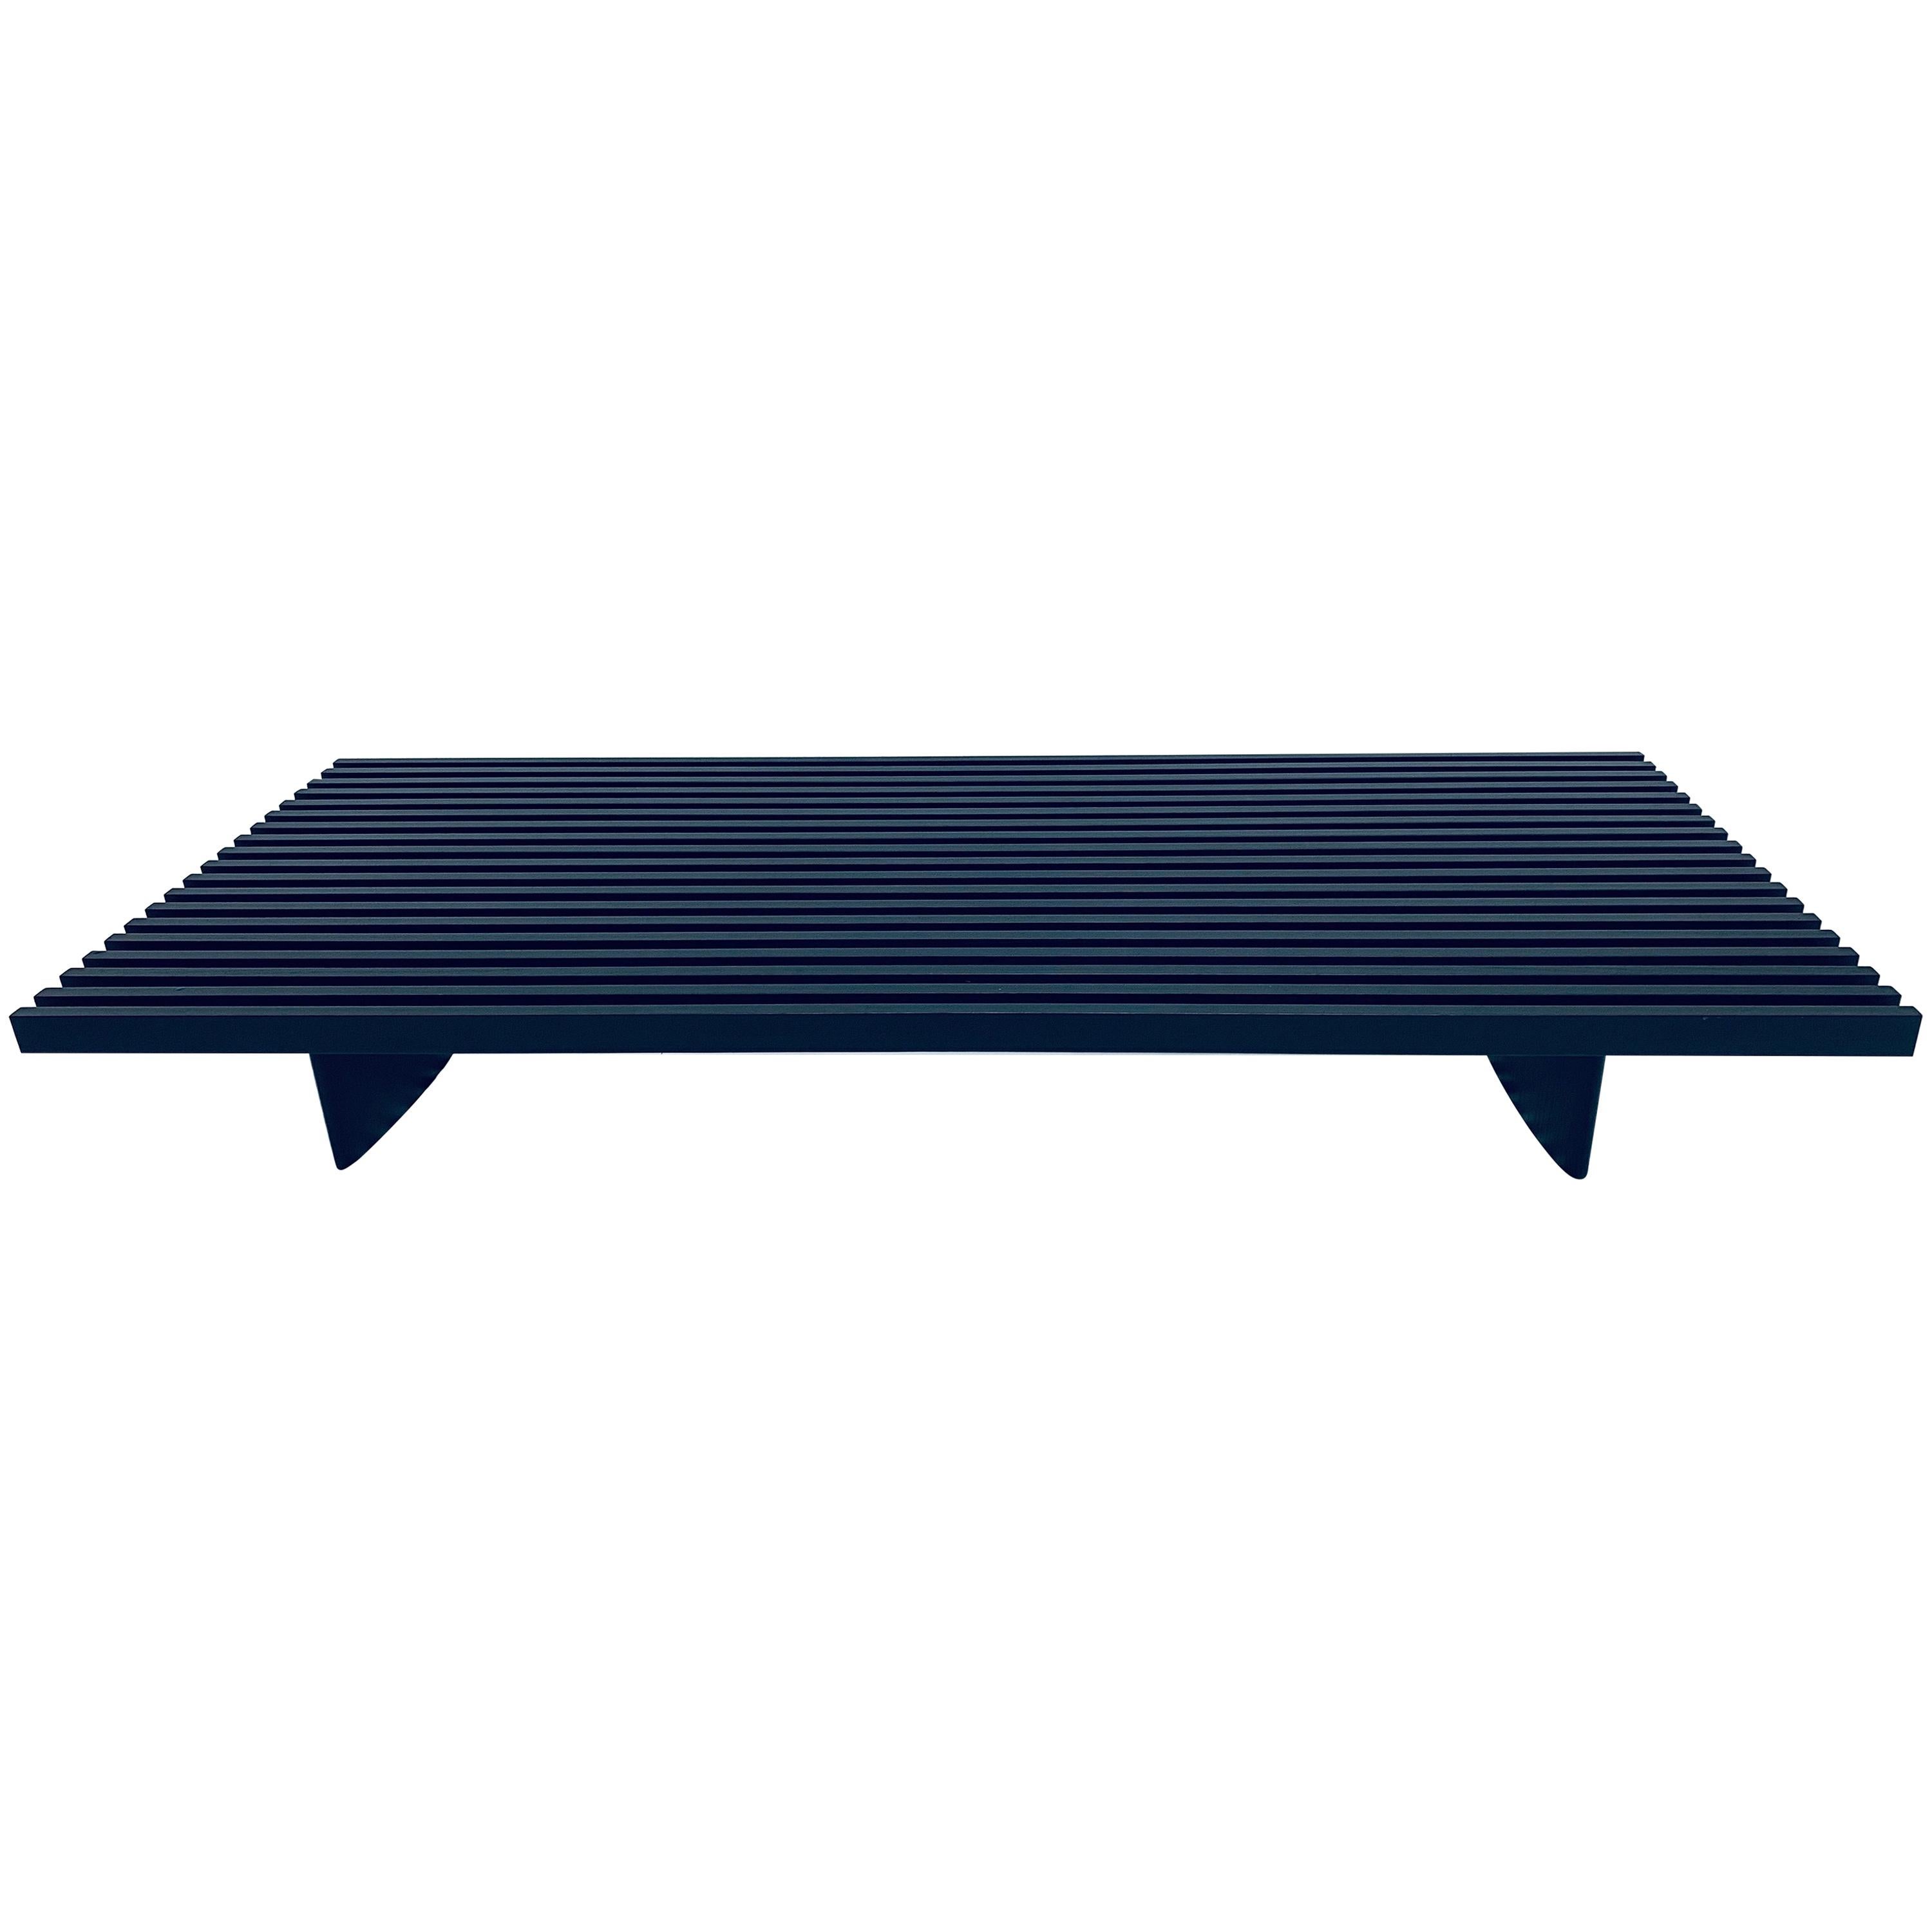 Charlotte Perriand 514 Refolo Ebony Stained Oak Coffee Table Bench for Cassina